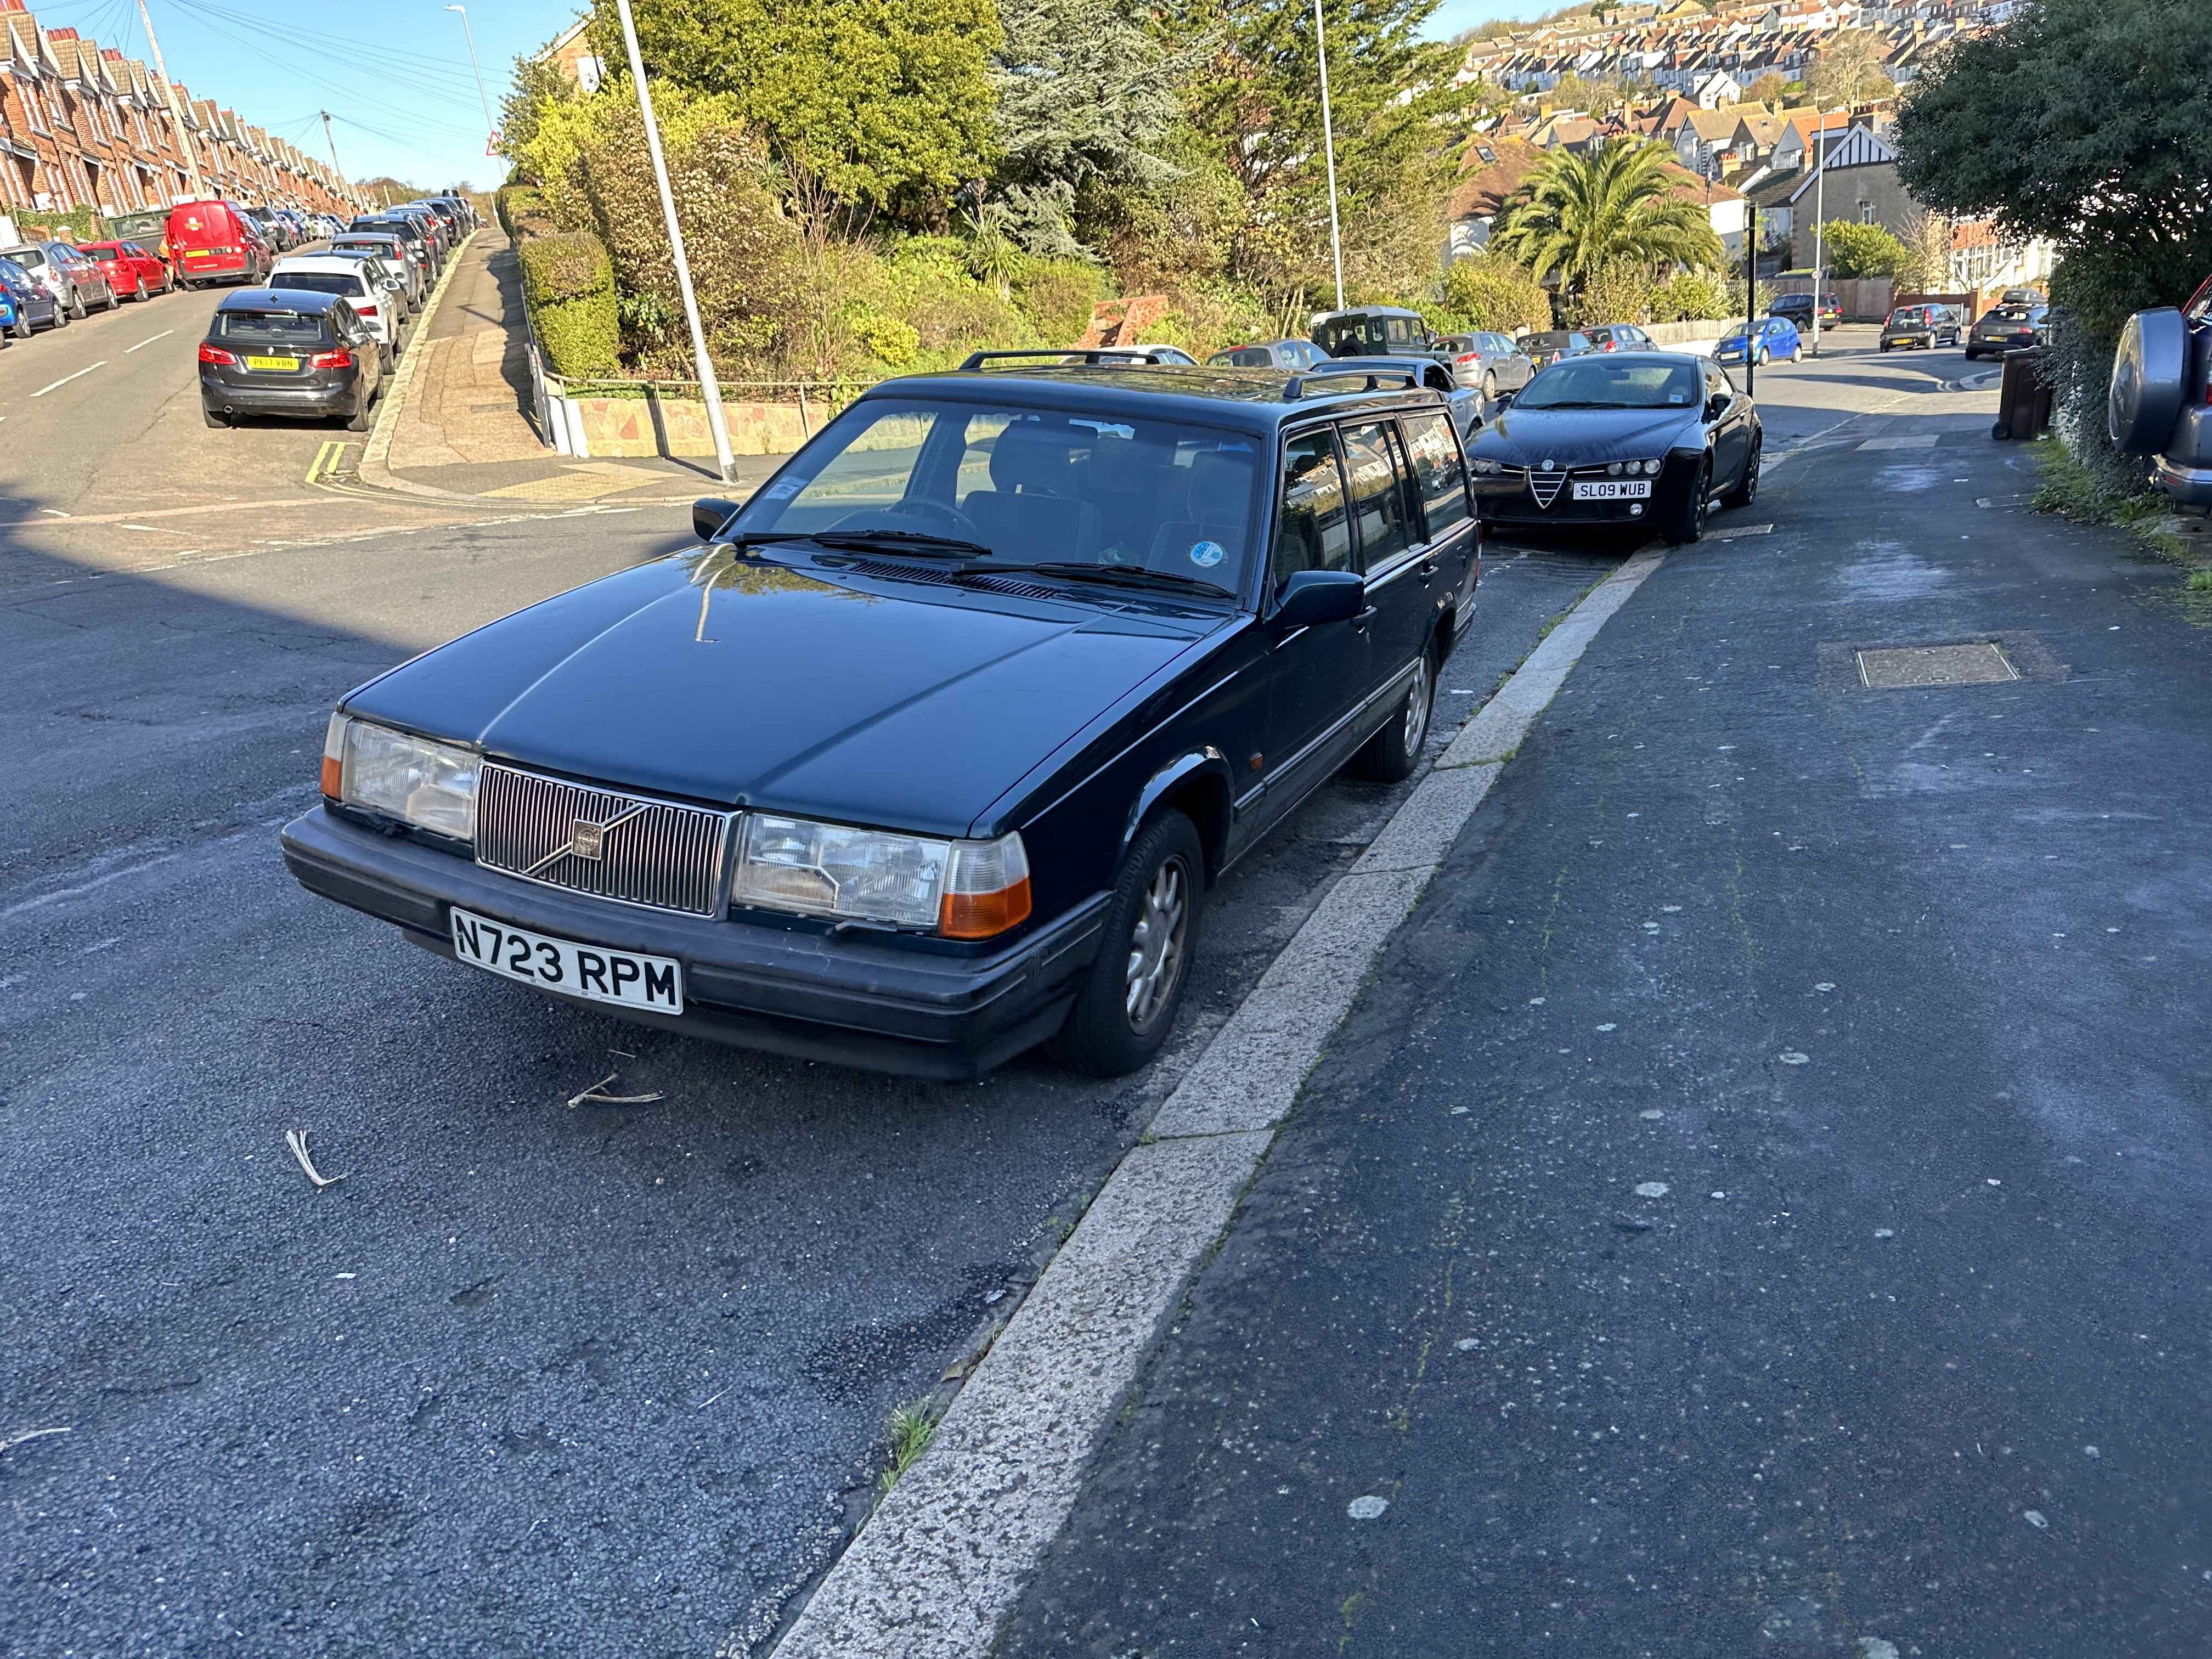 Photograph of N723 RPM - a Green Volvo 940 parked in Hollingdean by a non-resident who uses the local area as part of their Brighton commute. The second of three photographs supplied by the residents of Hollingdean.